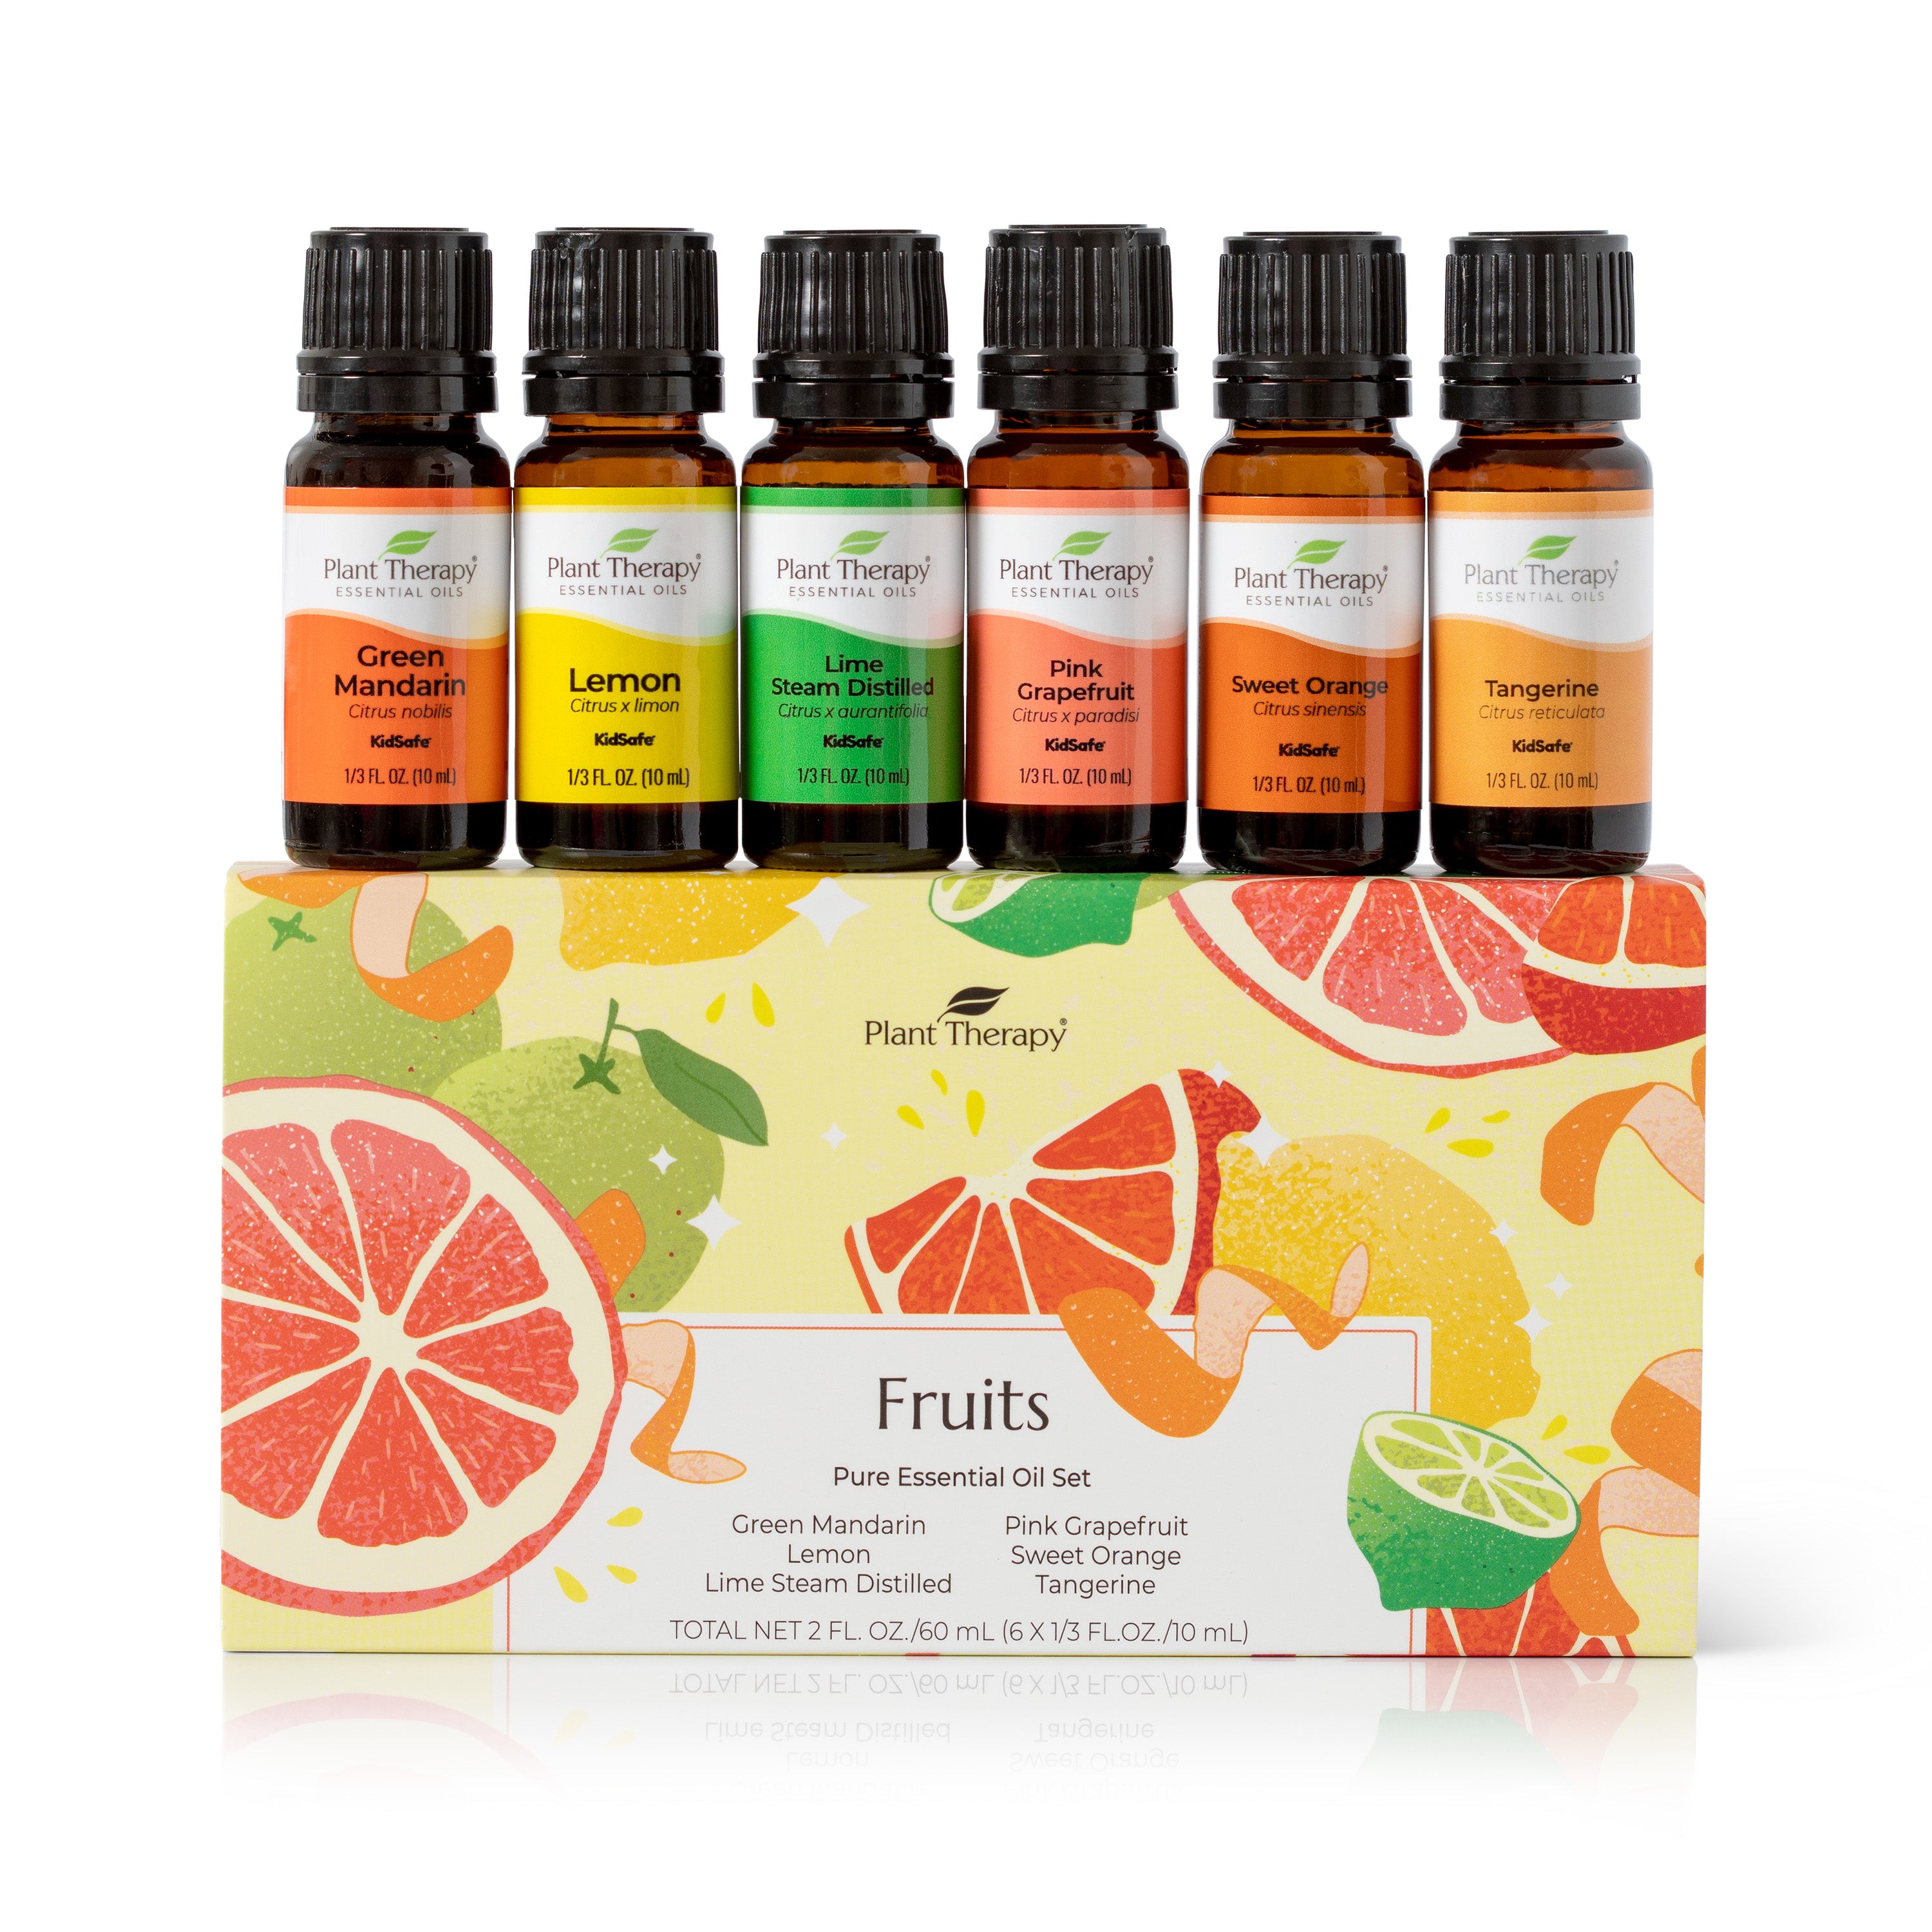 4 MS Aromatherapy Scents, Health, Wellness, and Mood Boosting